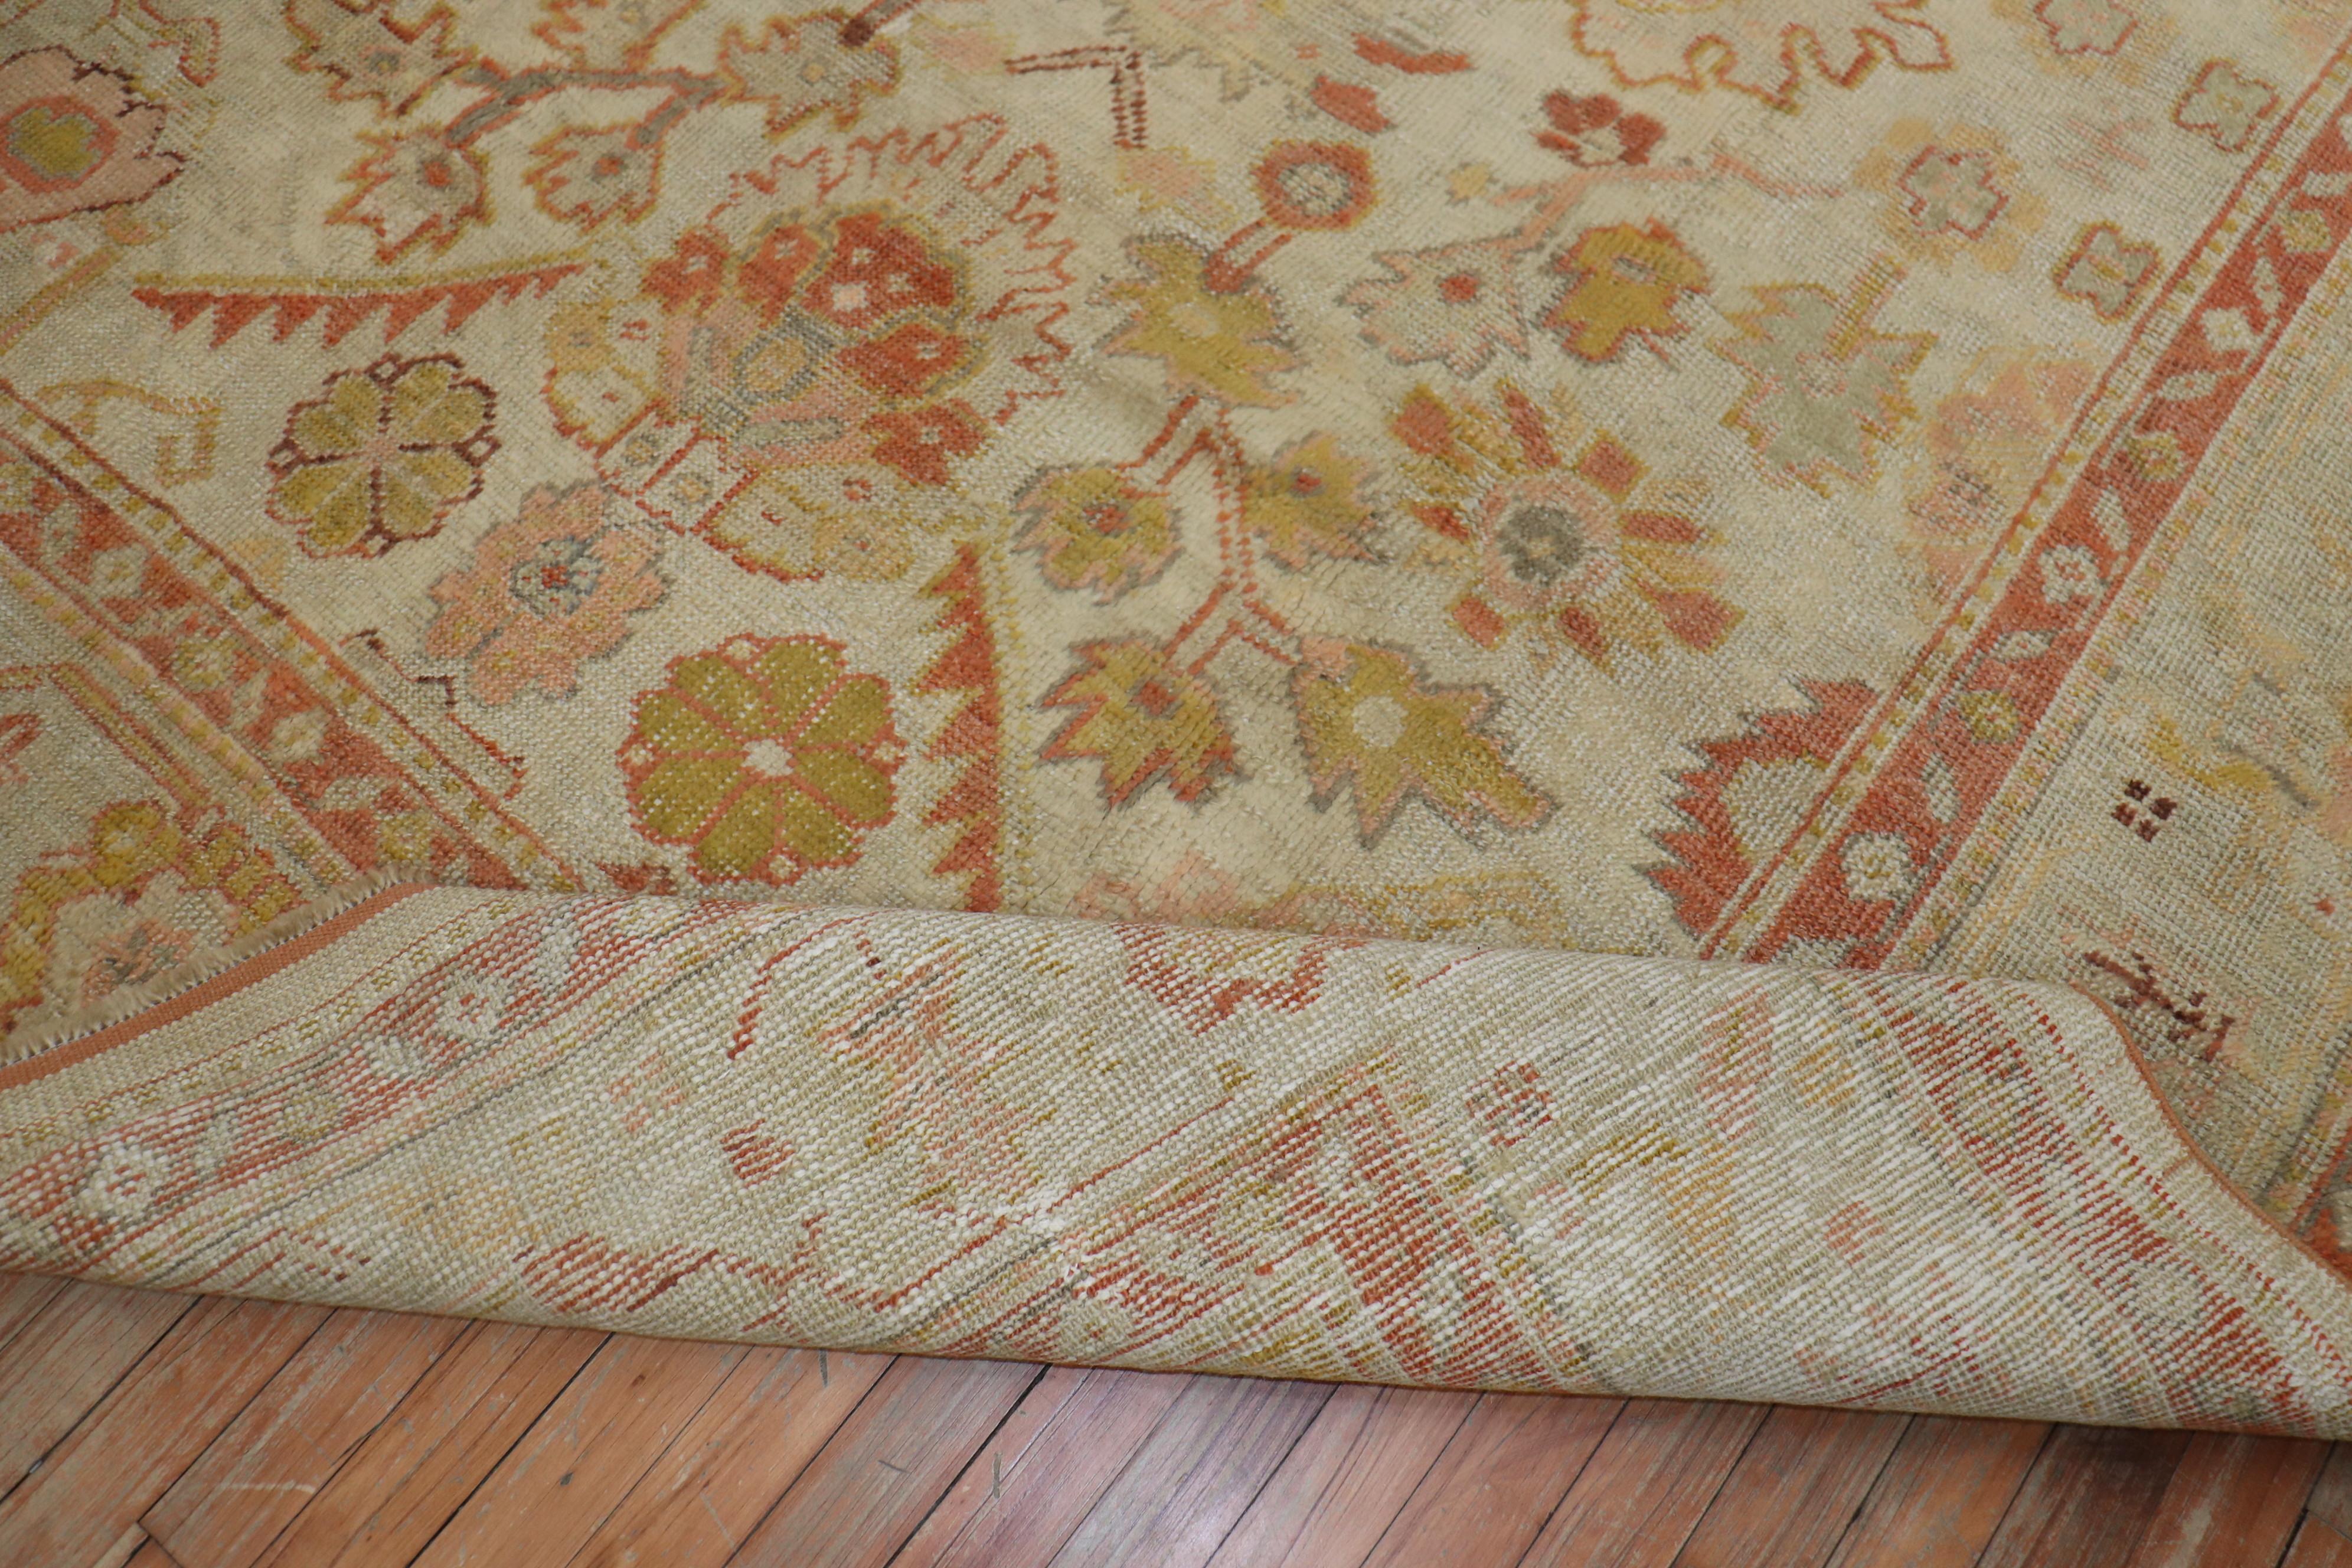 An early 20th century antique Turkish Oushak carpet with an all-over design on an. Ivory field, dominant accents in orange.

Measures: 7' x 9'6''.